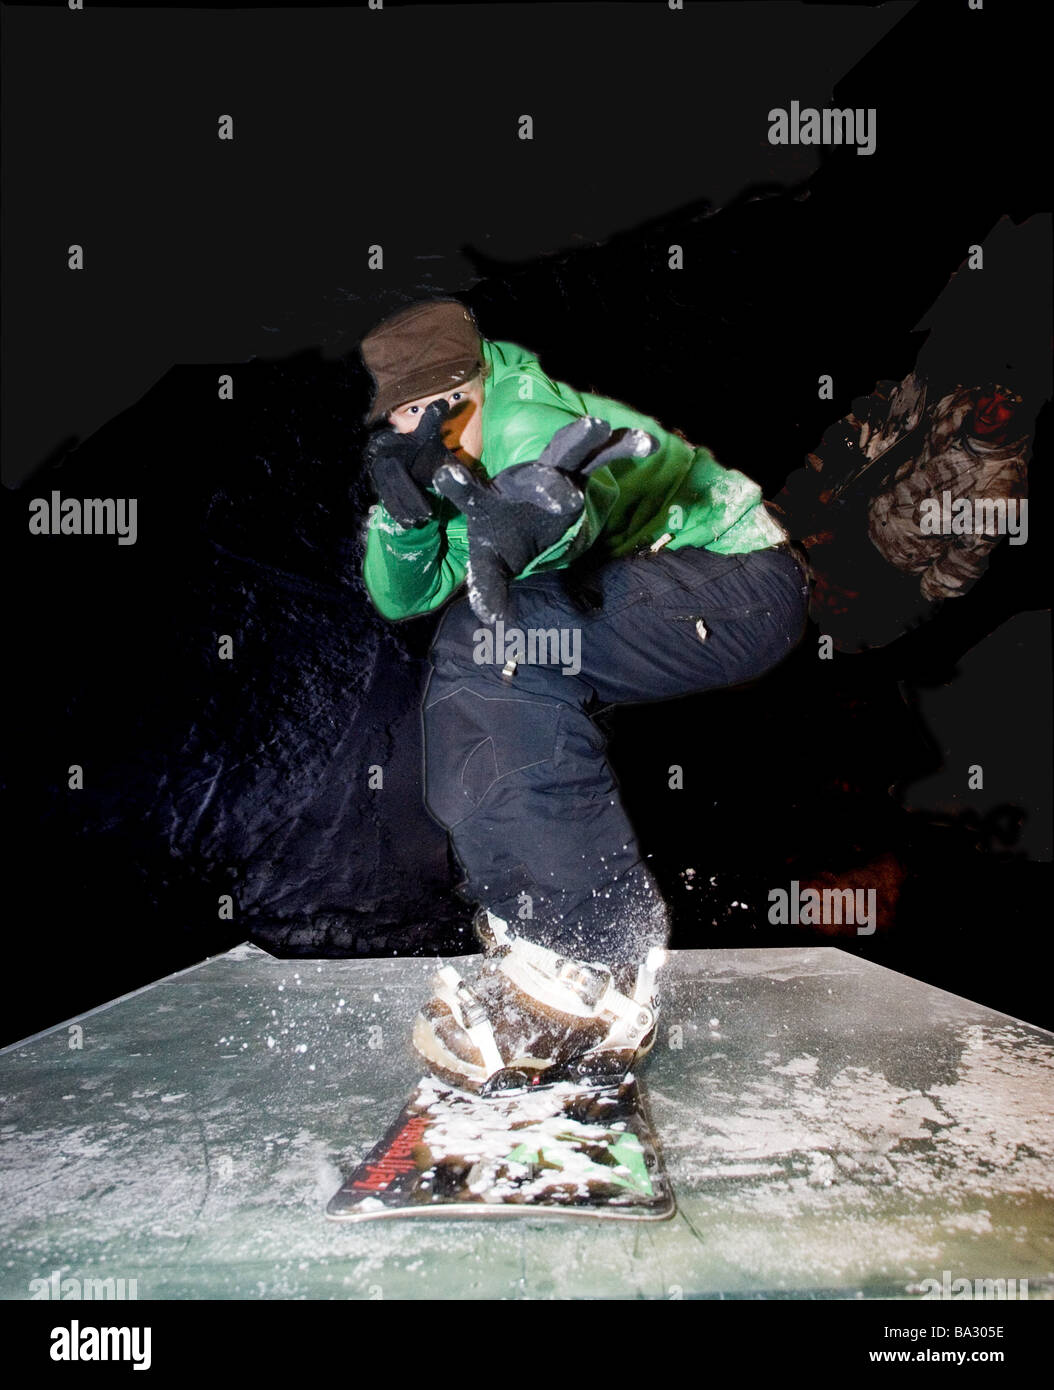 Snowboarder heed Moritz Liebig Profisnowboarder personality-rights Funpark pose evening man young Snowboard Snowboarden Action Stock Photo